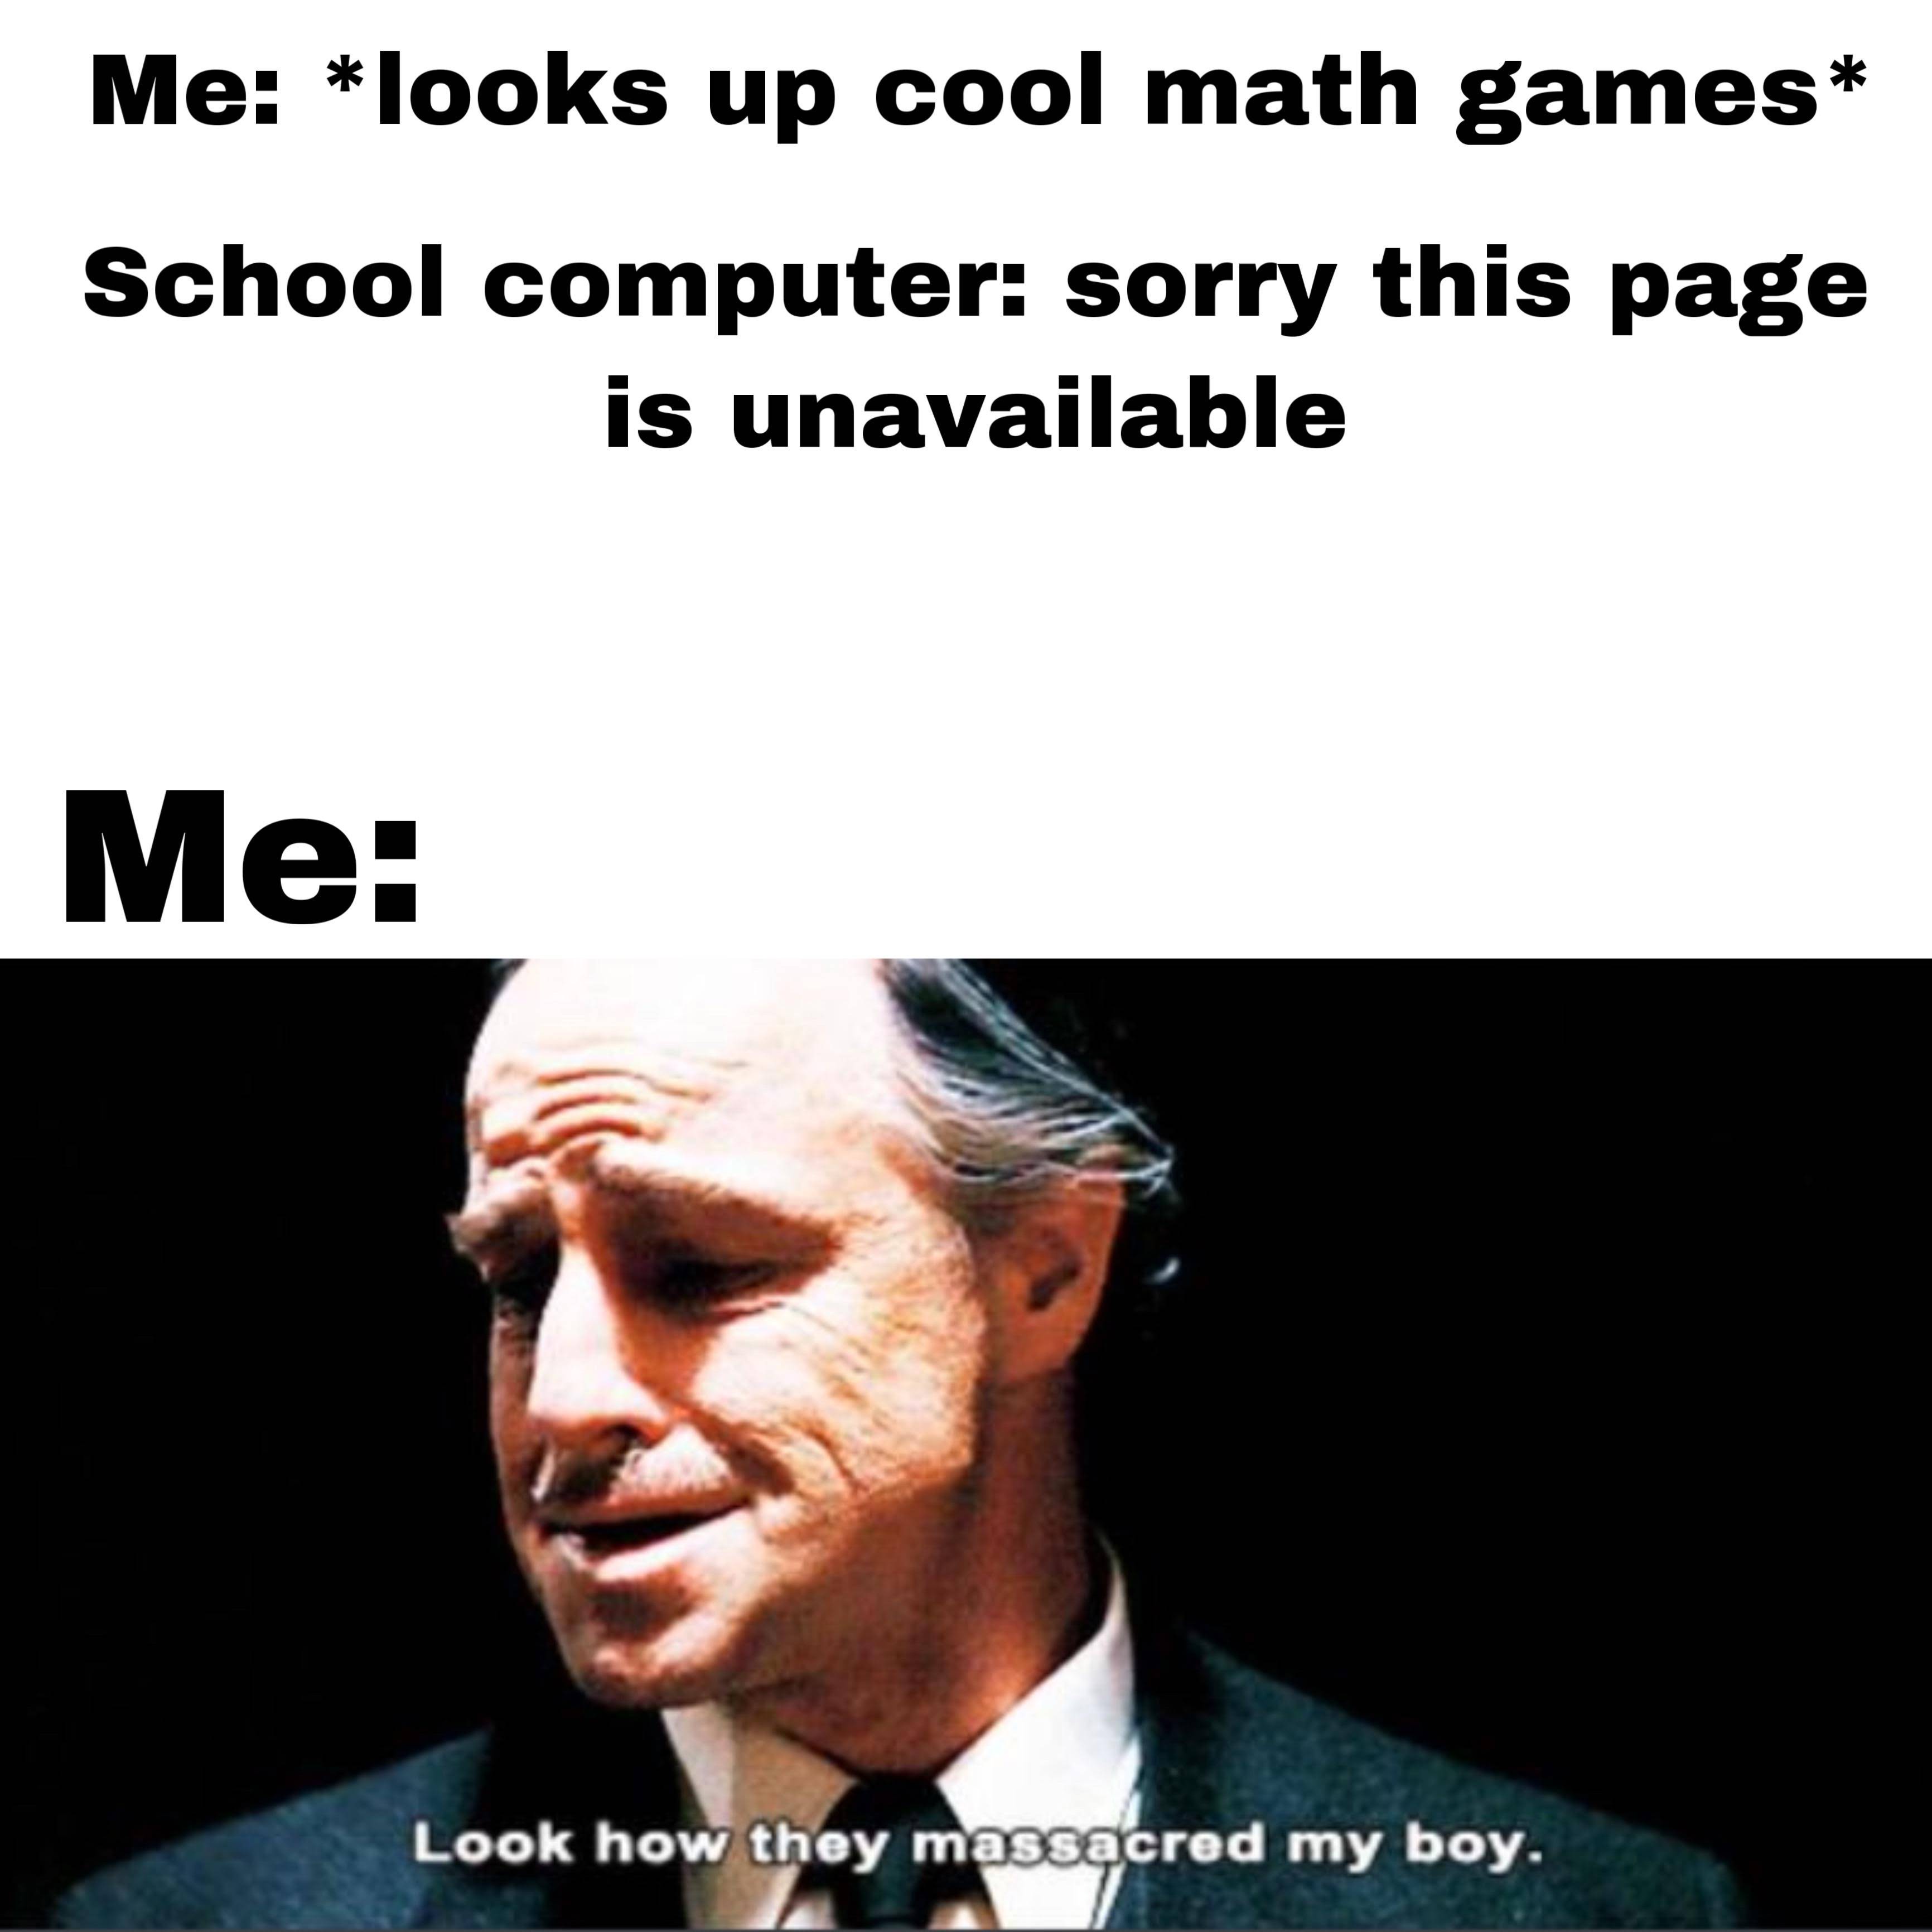 dank memes - look how they massacred my boy - Me looks up cool math games School computer sorry this page is unavailable Me Look how they massacred my boy.